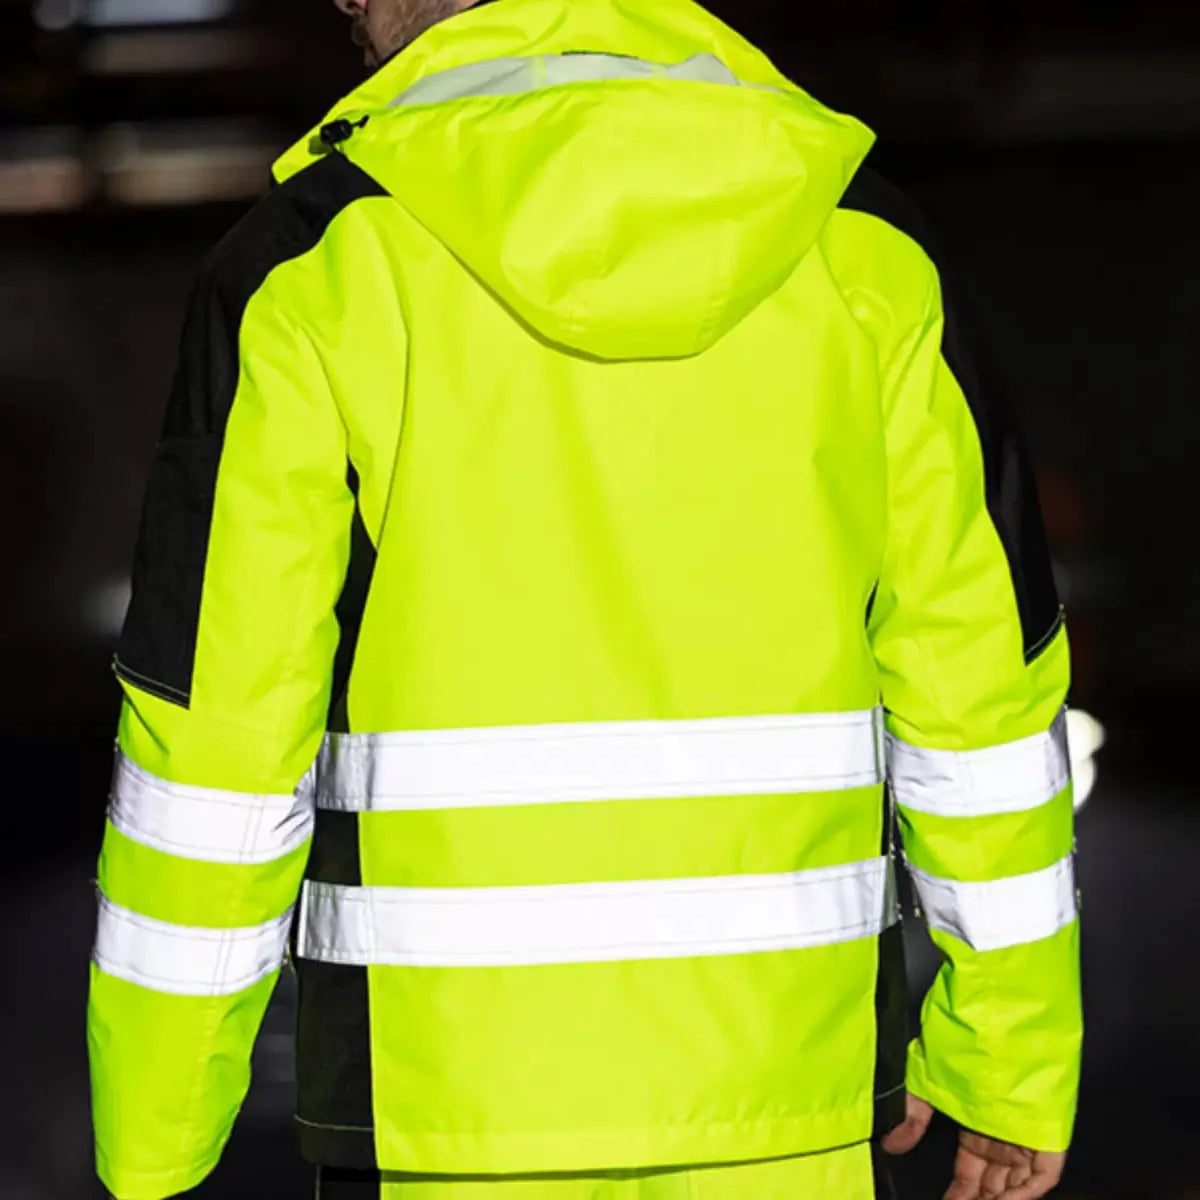 Safety Protection Suit Winter Reflective Jacket and Pants Men for Work Hi Vis Work Clothes Warm Clothing for Worker